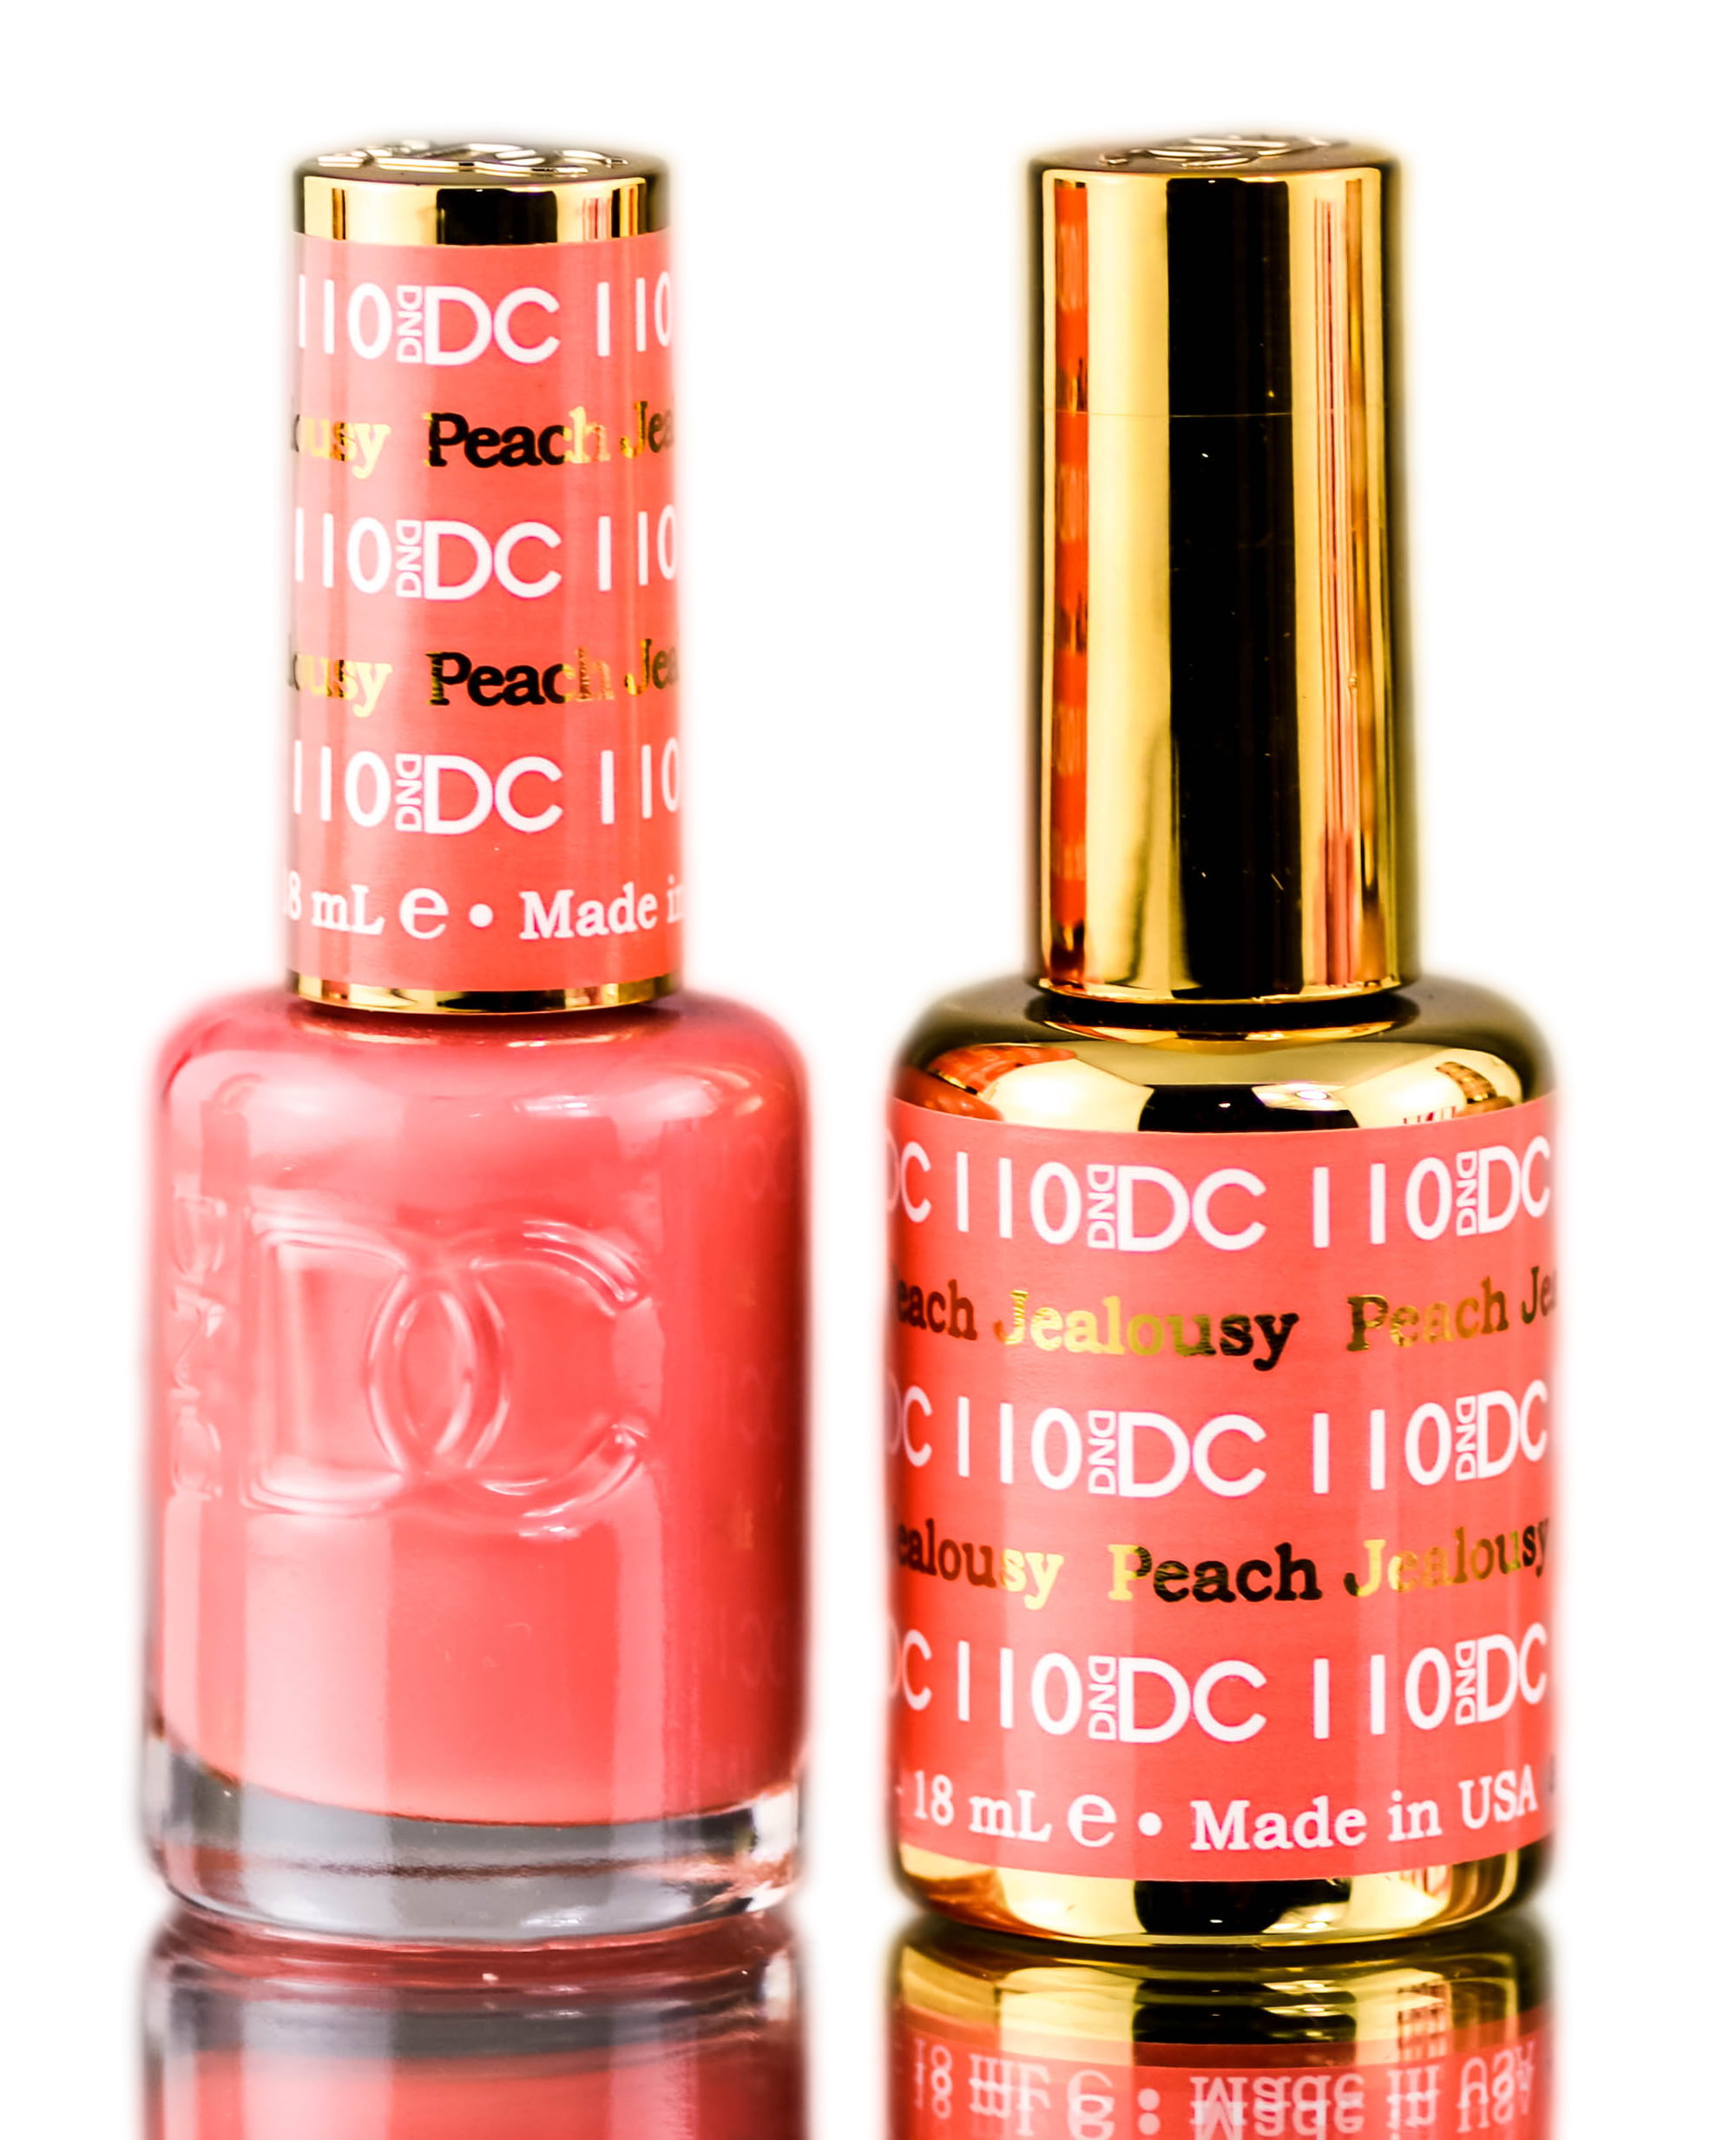 DND DC Pinks GEL POLISH DUO, Gel Lacquer 0.5 oz + Matching Nail Polish Color  0.5 oz, Daisy Nails - Peach Jealousy (110) 